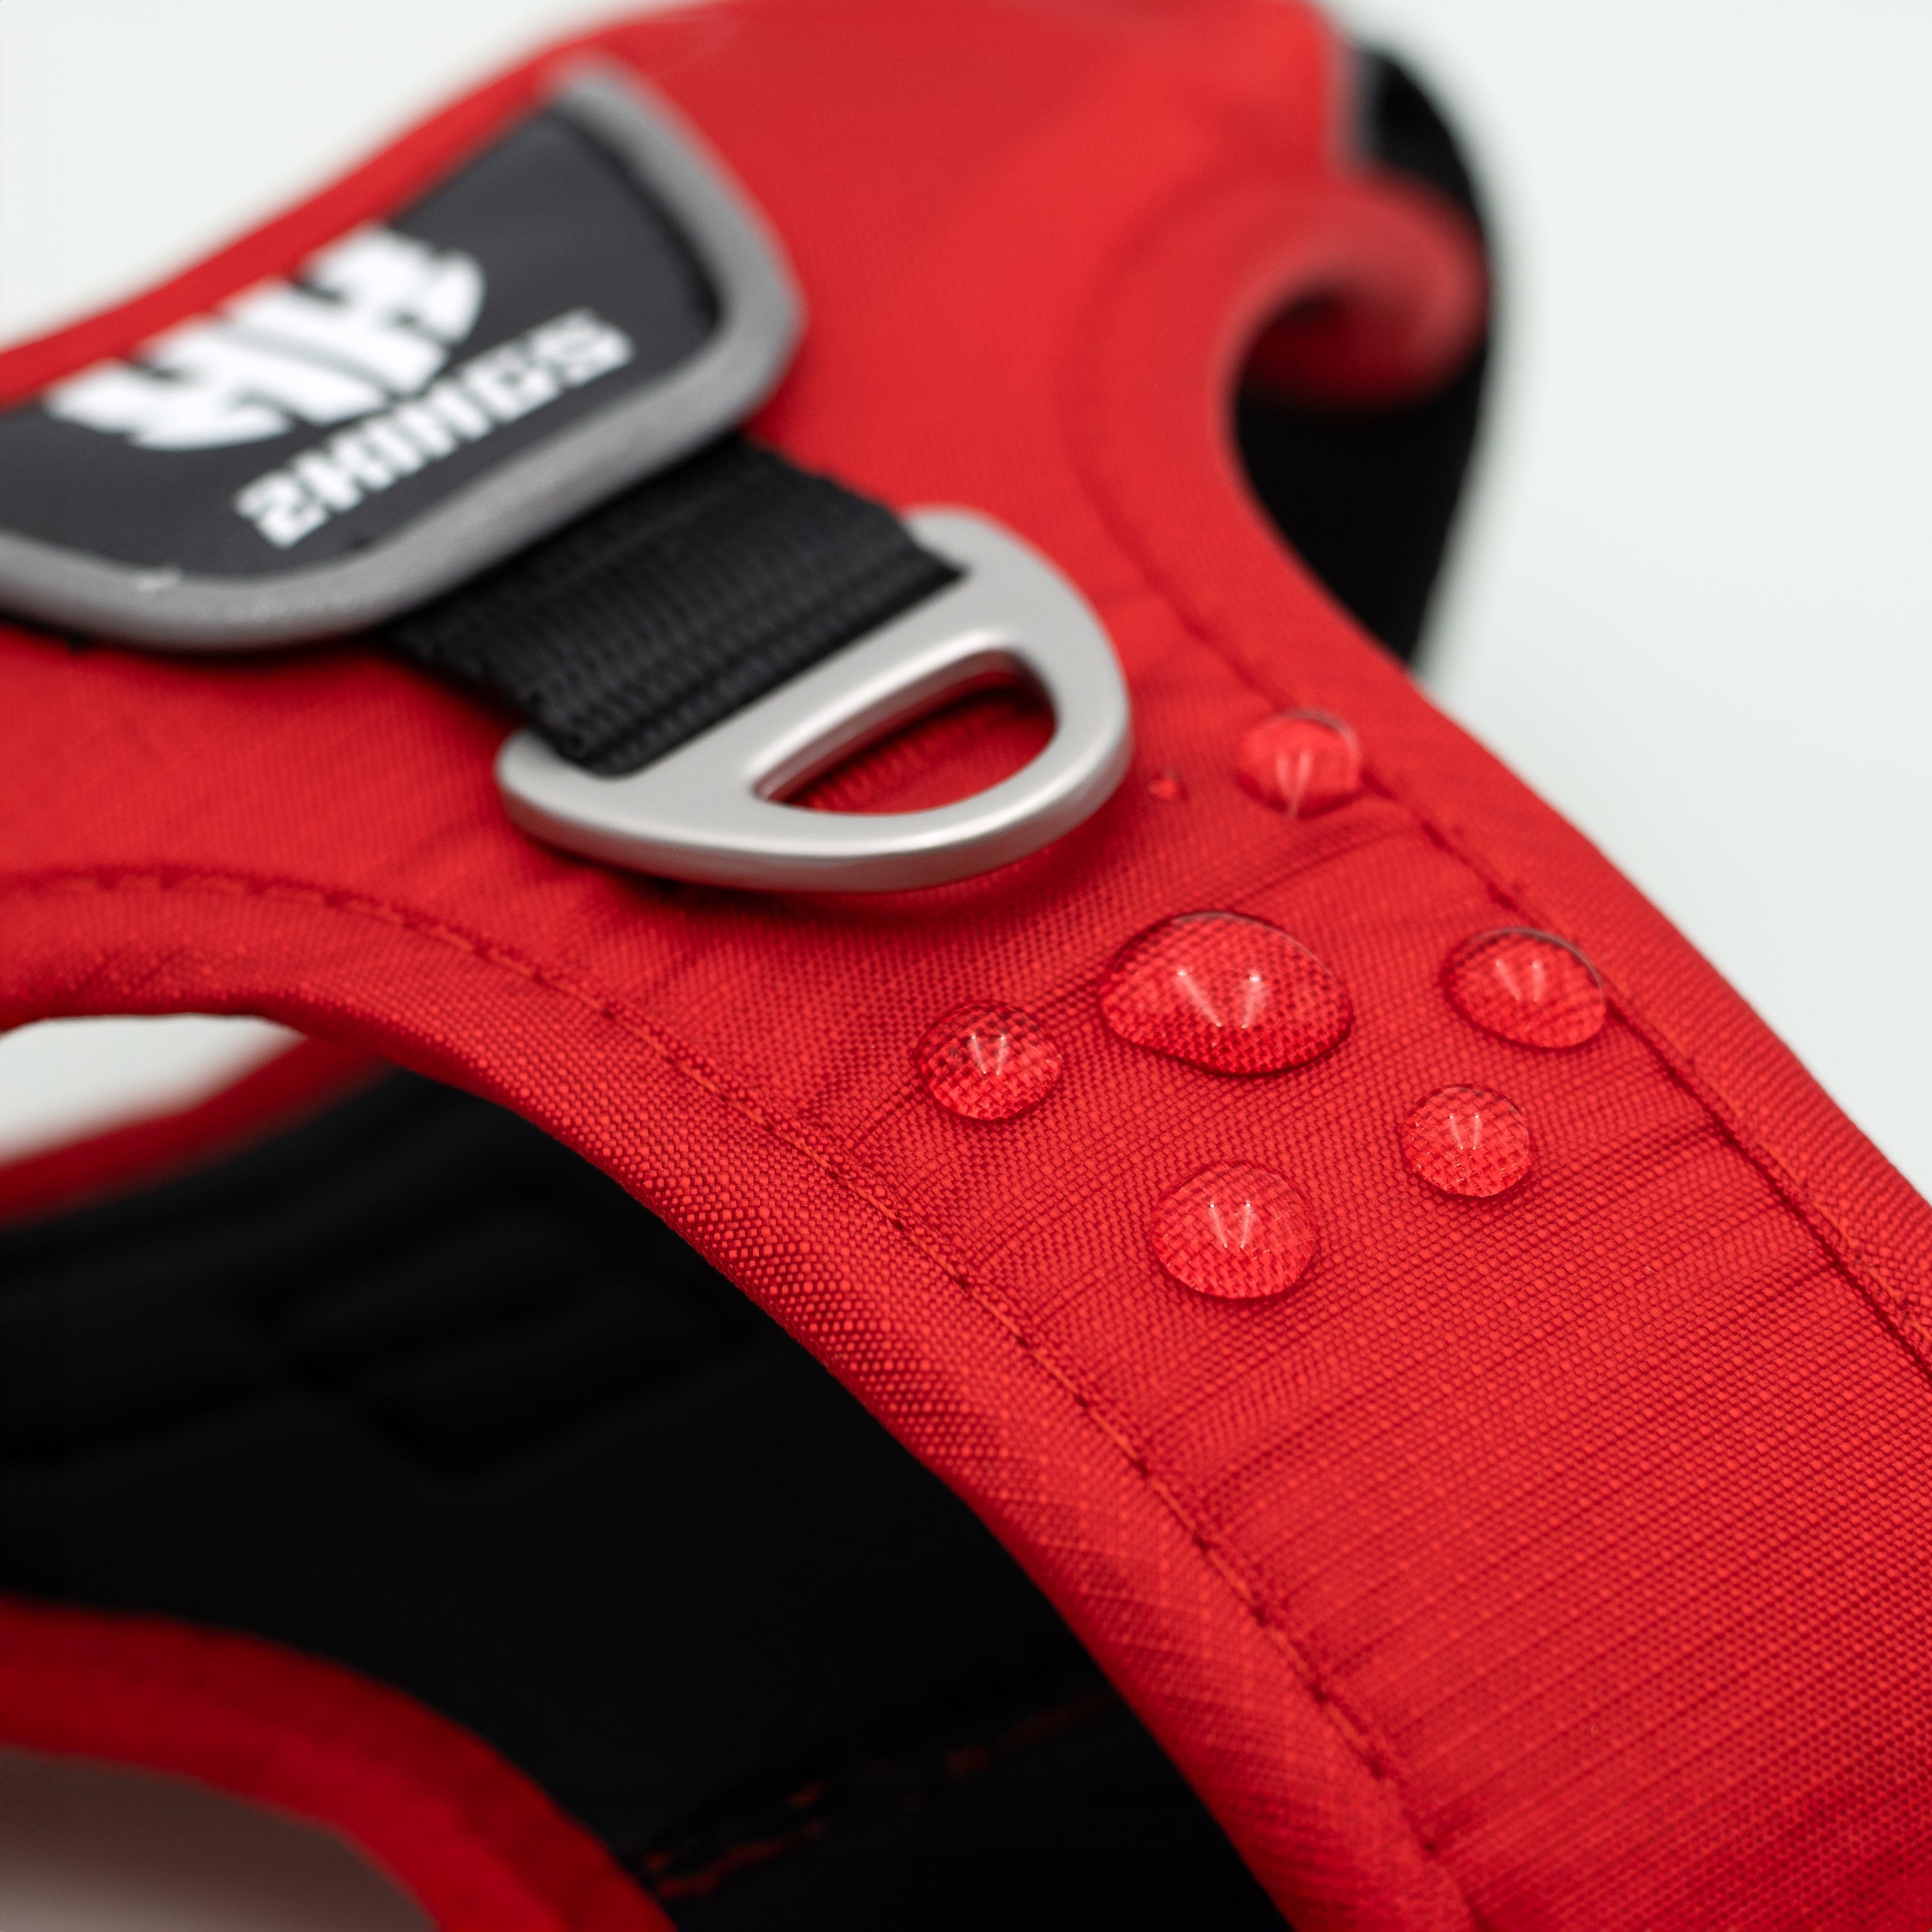 Red comfort dog harness highlighted by water droplets to showcase its waterproof feature, designed for durability and comfort in wet conditions.